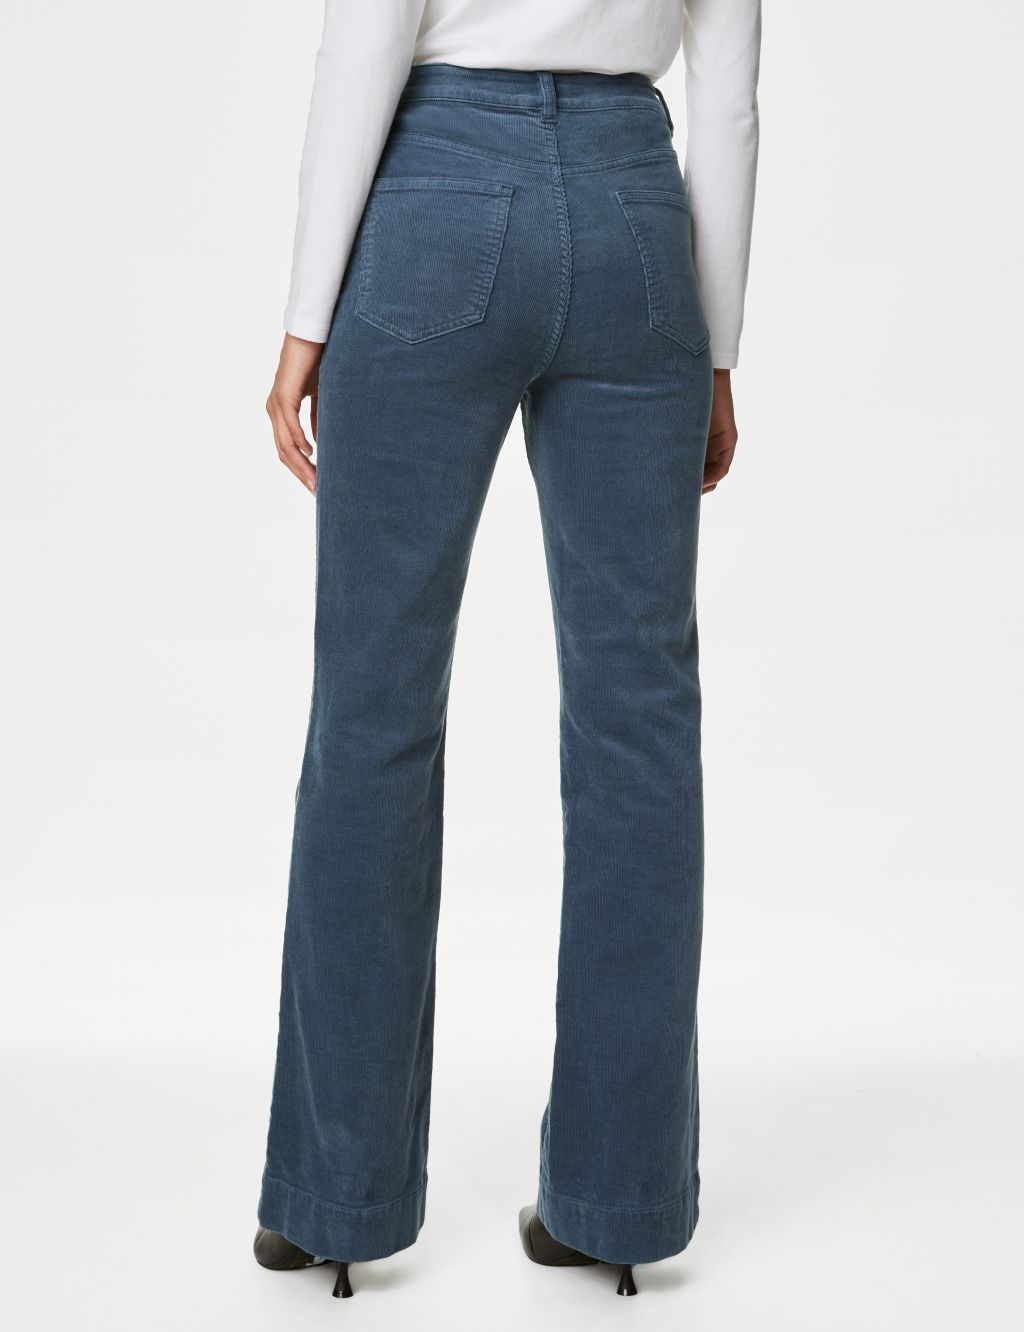 Cord High Waisted Flared Trousers image 5